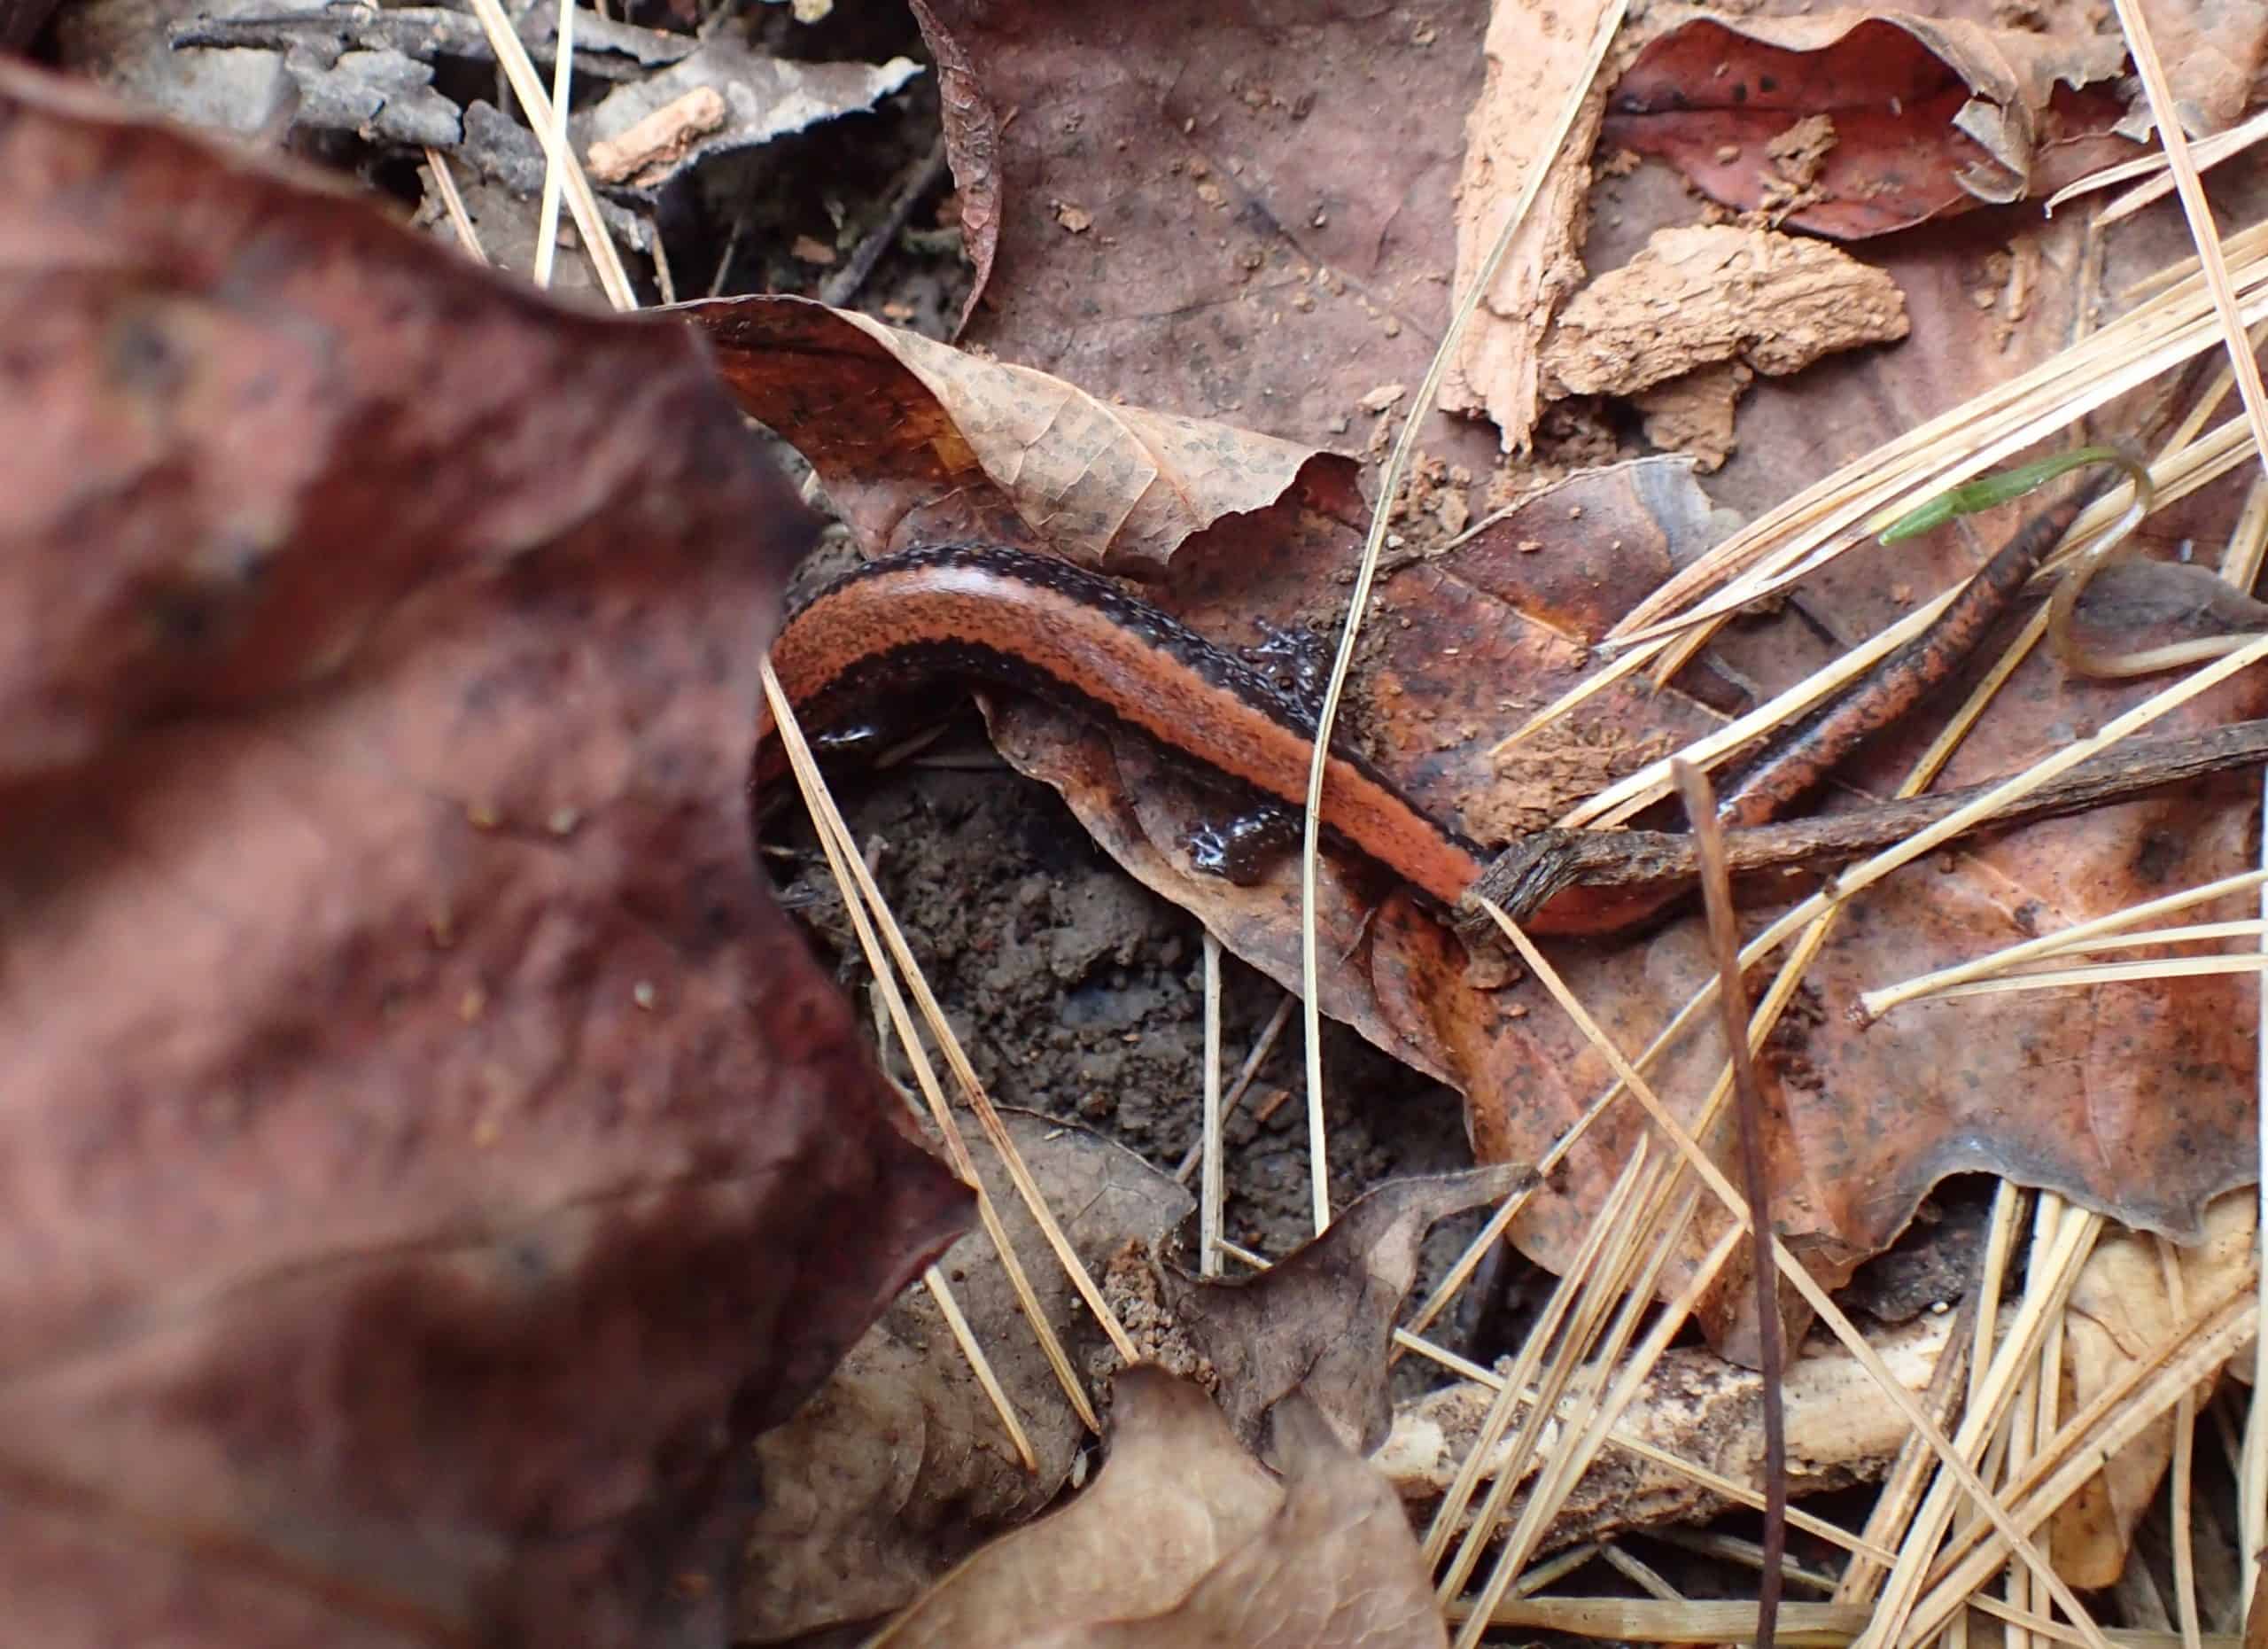 Red-backed salamander body and tail with face hidden beneath brown oak leaves and pine needles